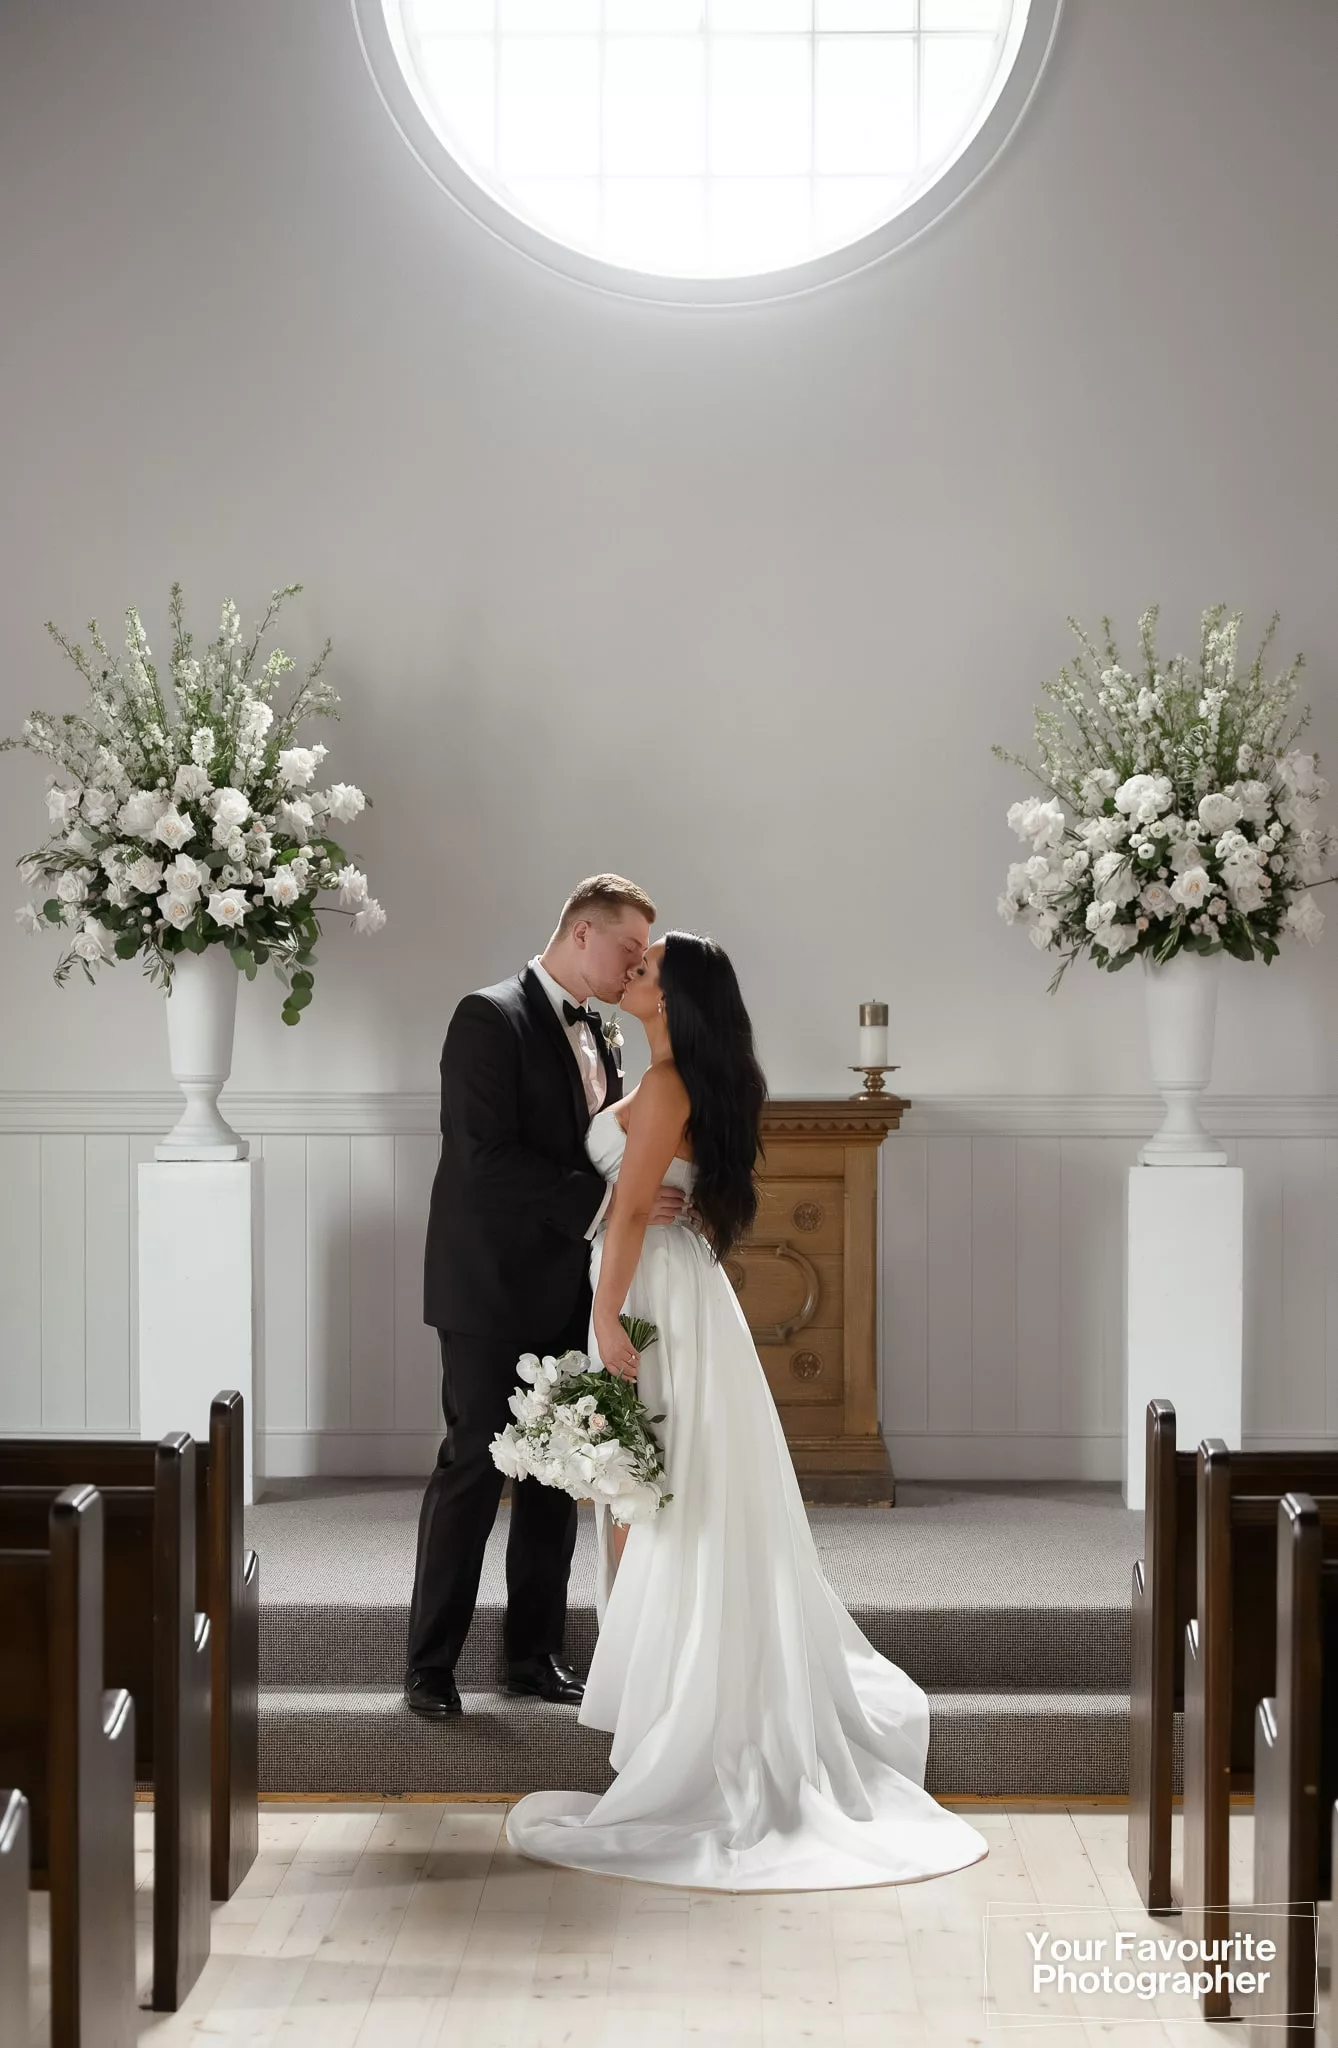 Bride and groom share a moment alone at the alter of the chapel at The Doctor's House in Kleinburg